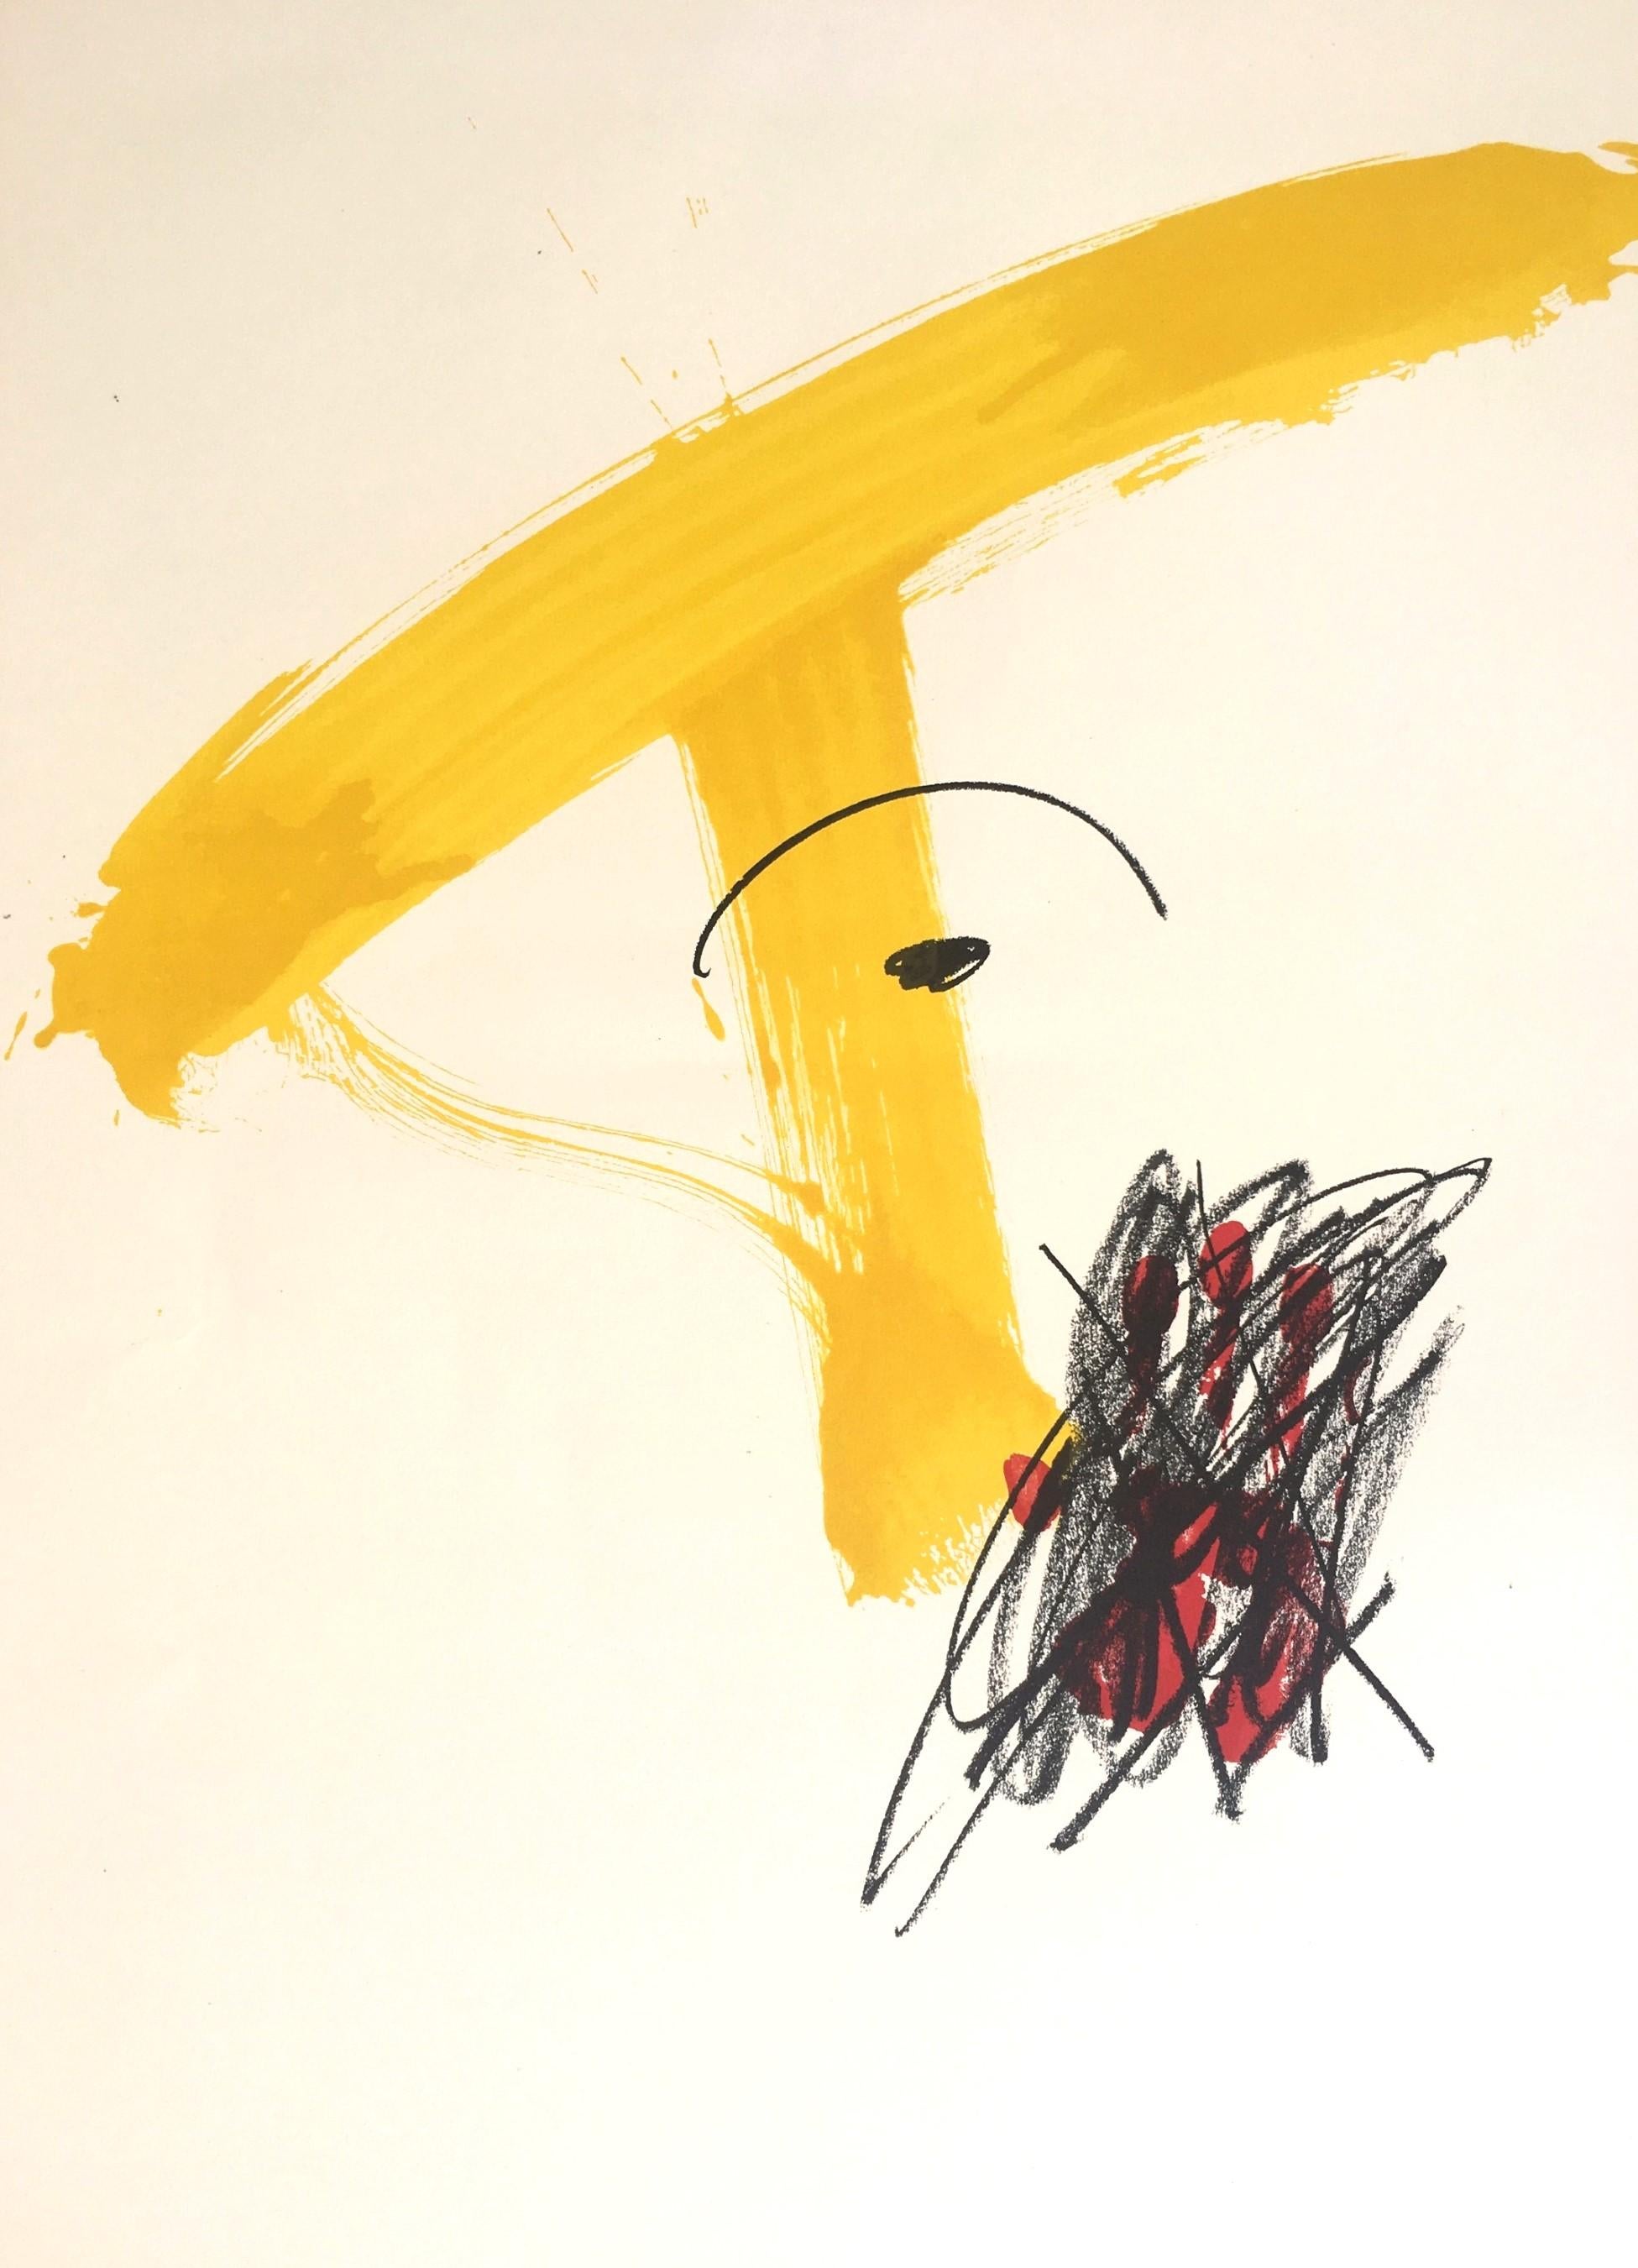 Tapies 93  Black  Yellow  Vertical. 1974 original lithography painting - Print by Antoni Tàpies